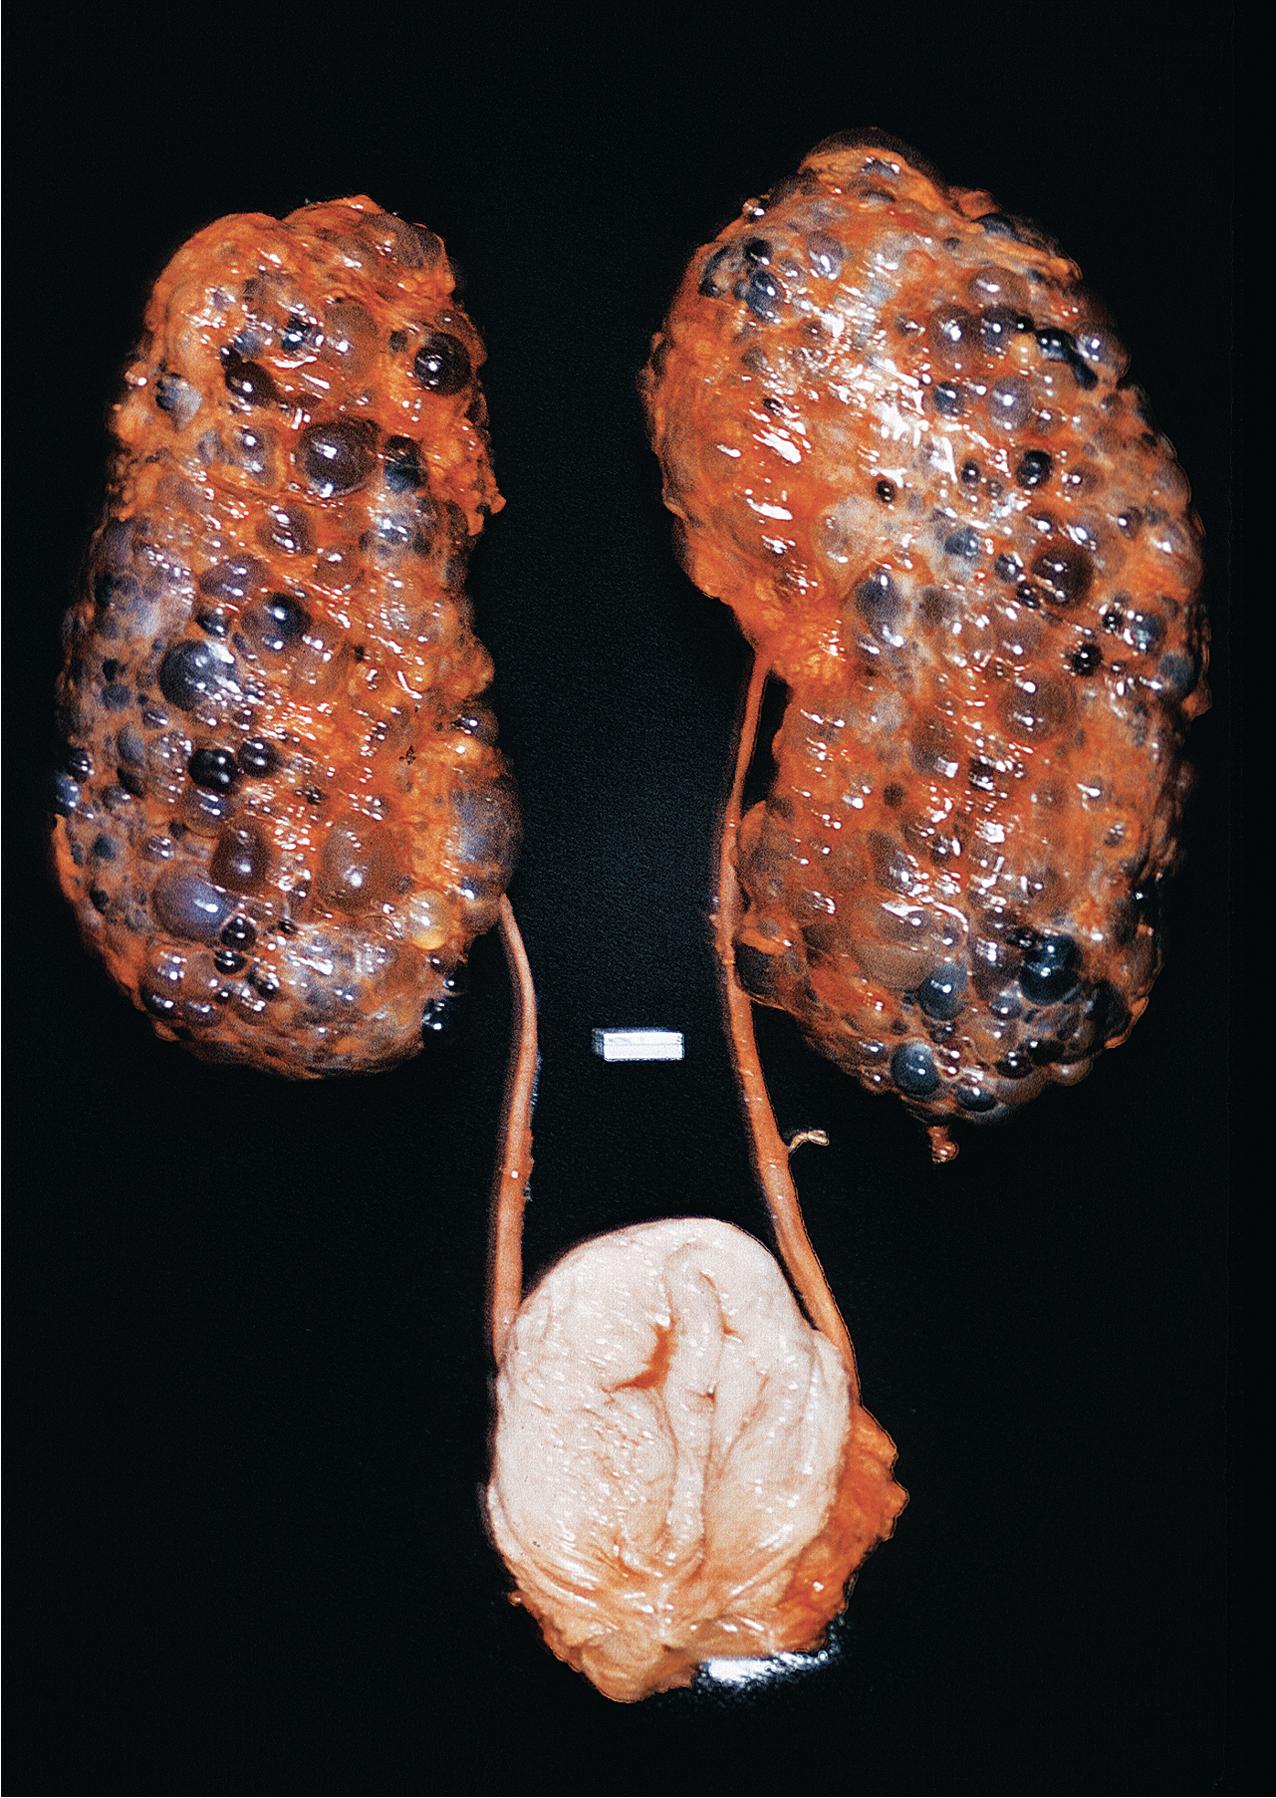 FIG. 9.1, Autosomal dominant polycystic kidney disease. The kidneys are markedly enlarged and consist of numerous cystic structures bulging through the surface. Many of the cysts contain dark material.